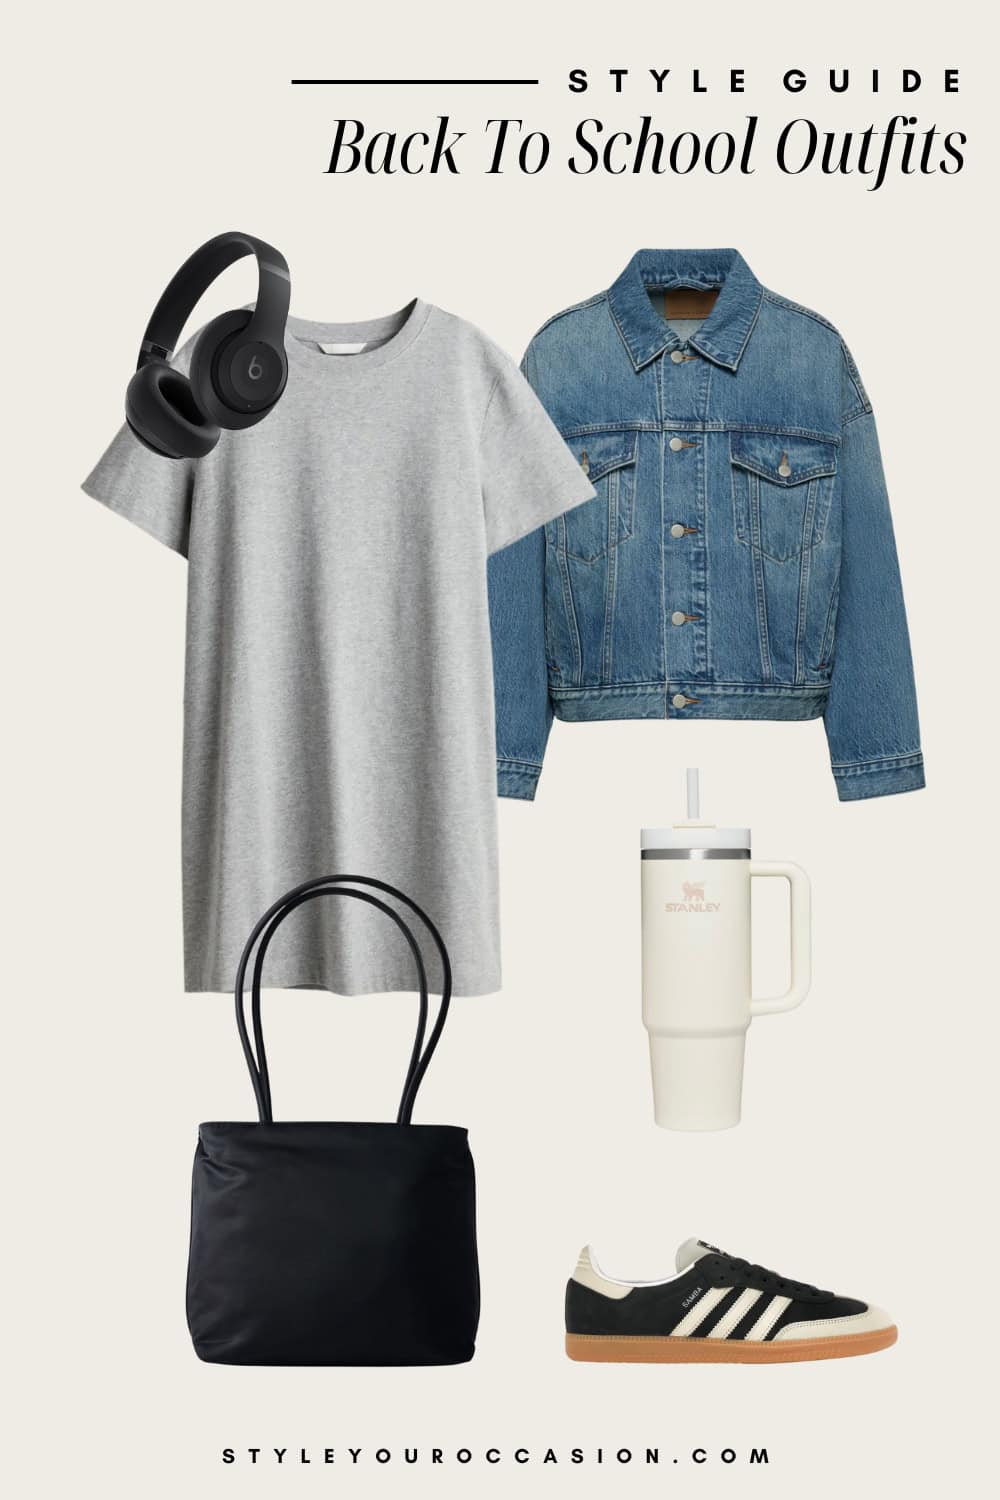 Flat lay outfit graphic of a t-shirt dress with a denim jacket and sneakers.